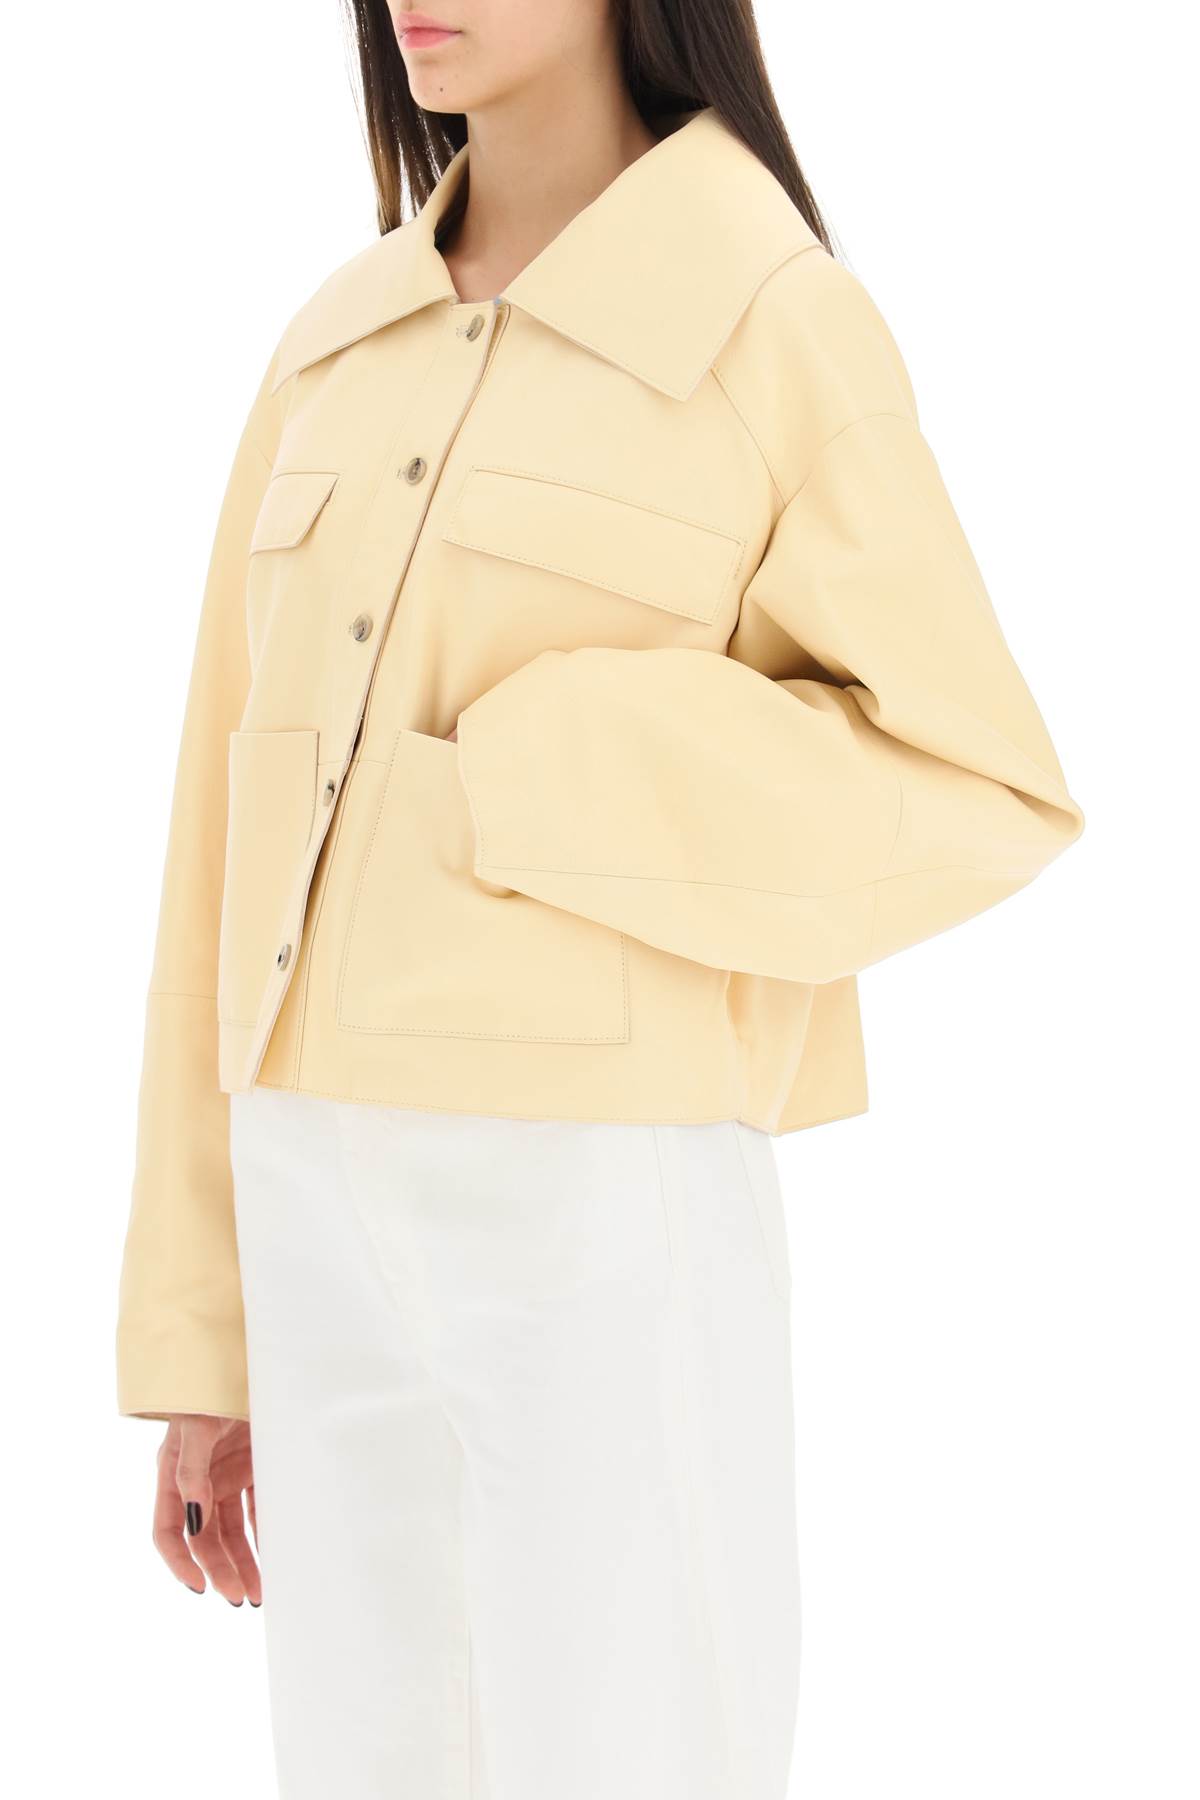 Shop Loulou Studio Sulat Leather Jacket In Cream (yellow)